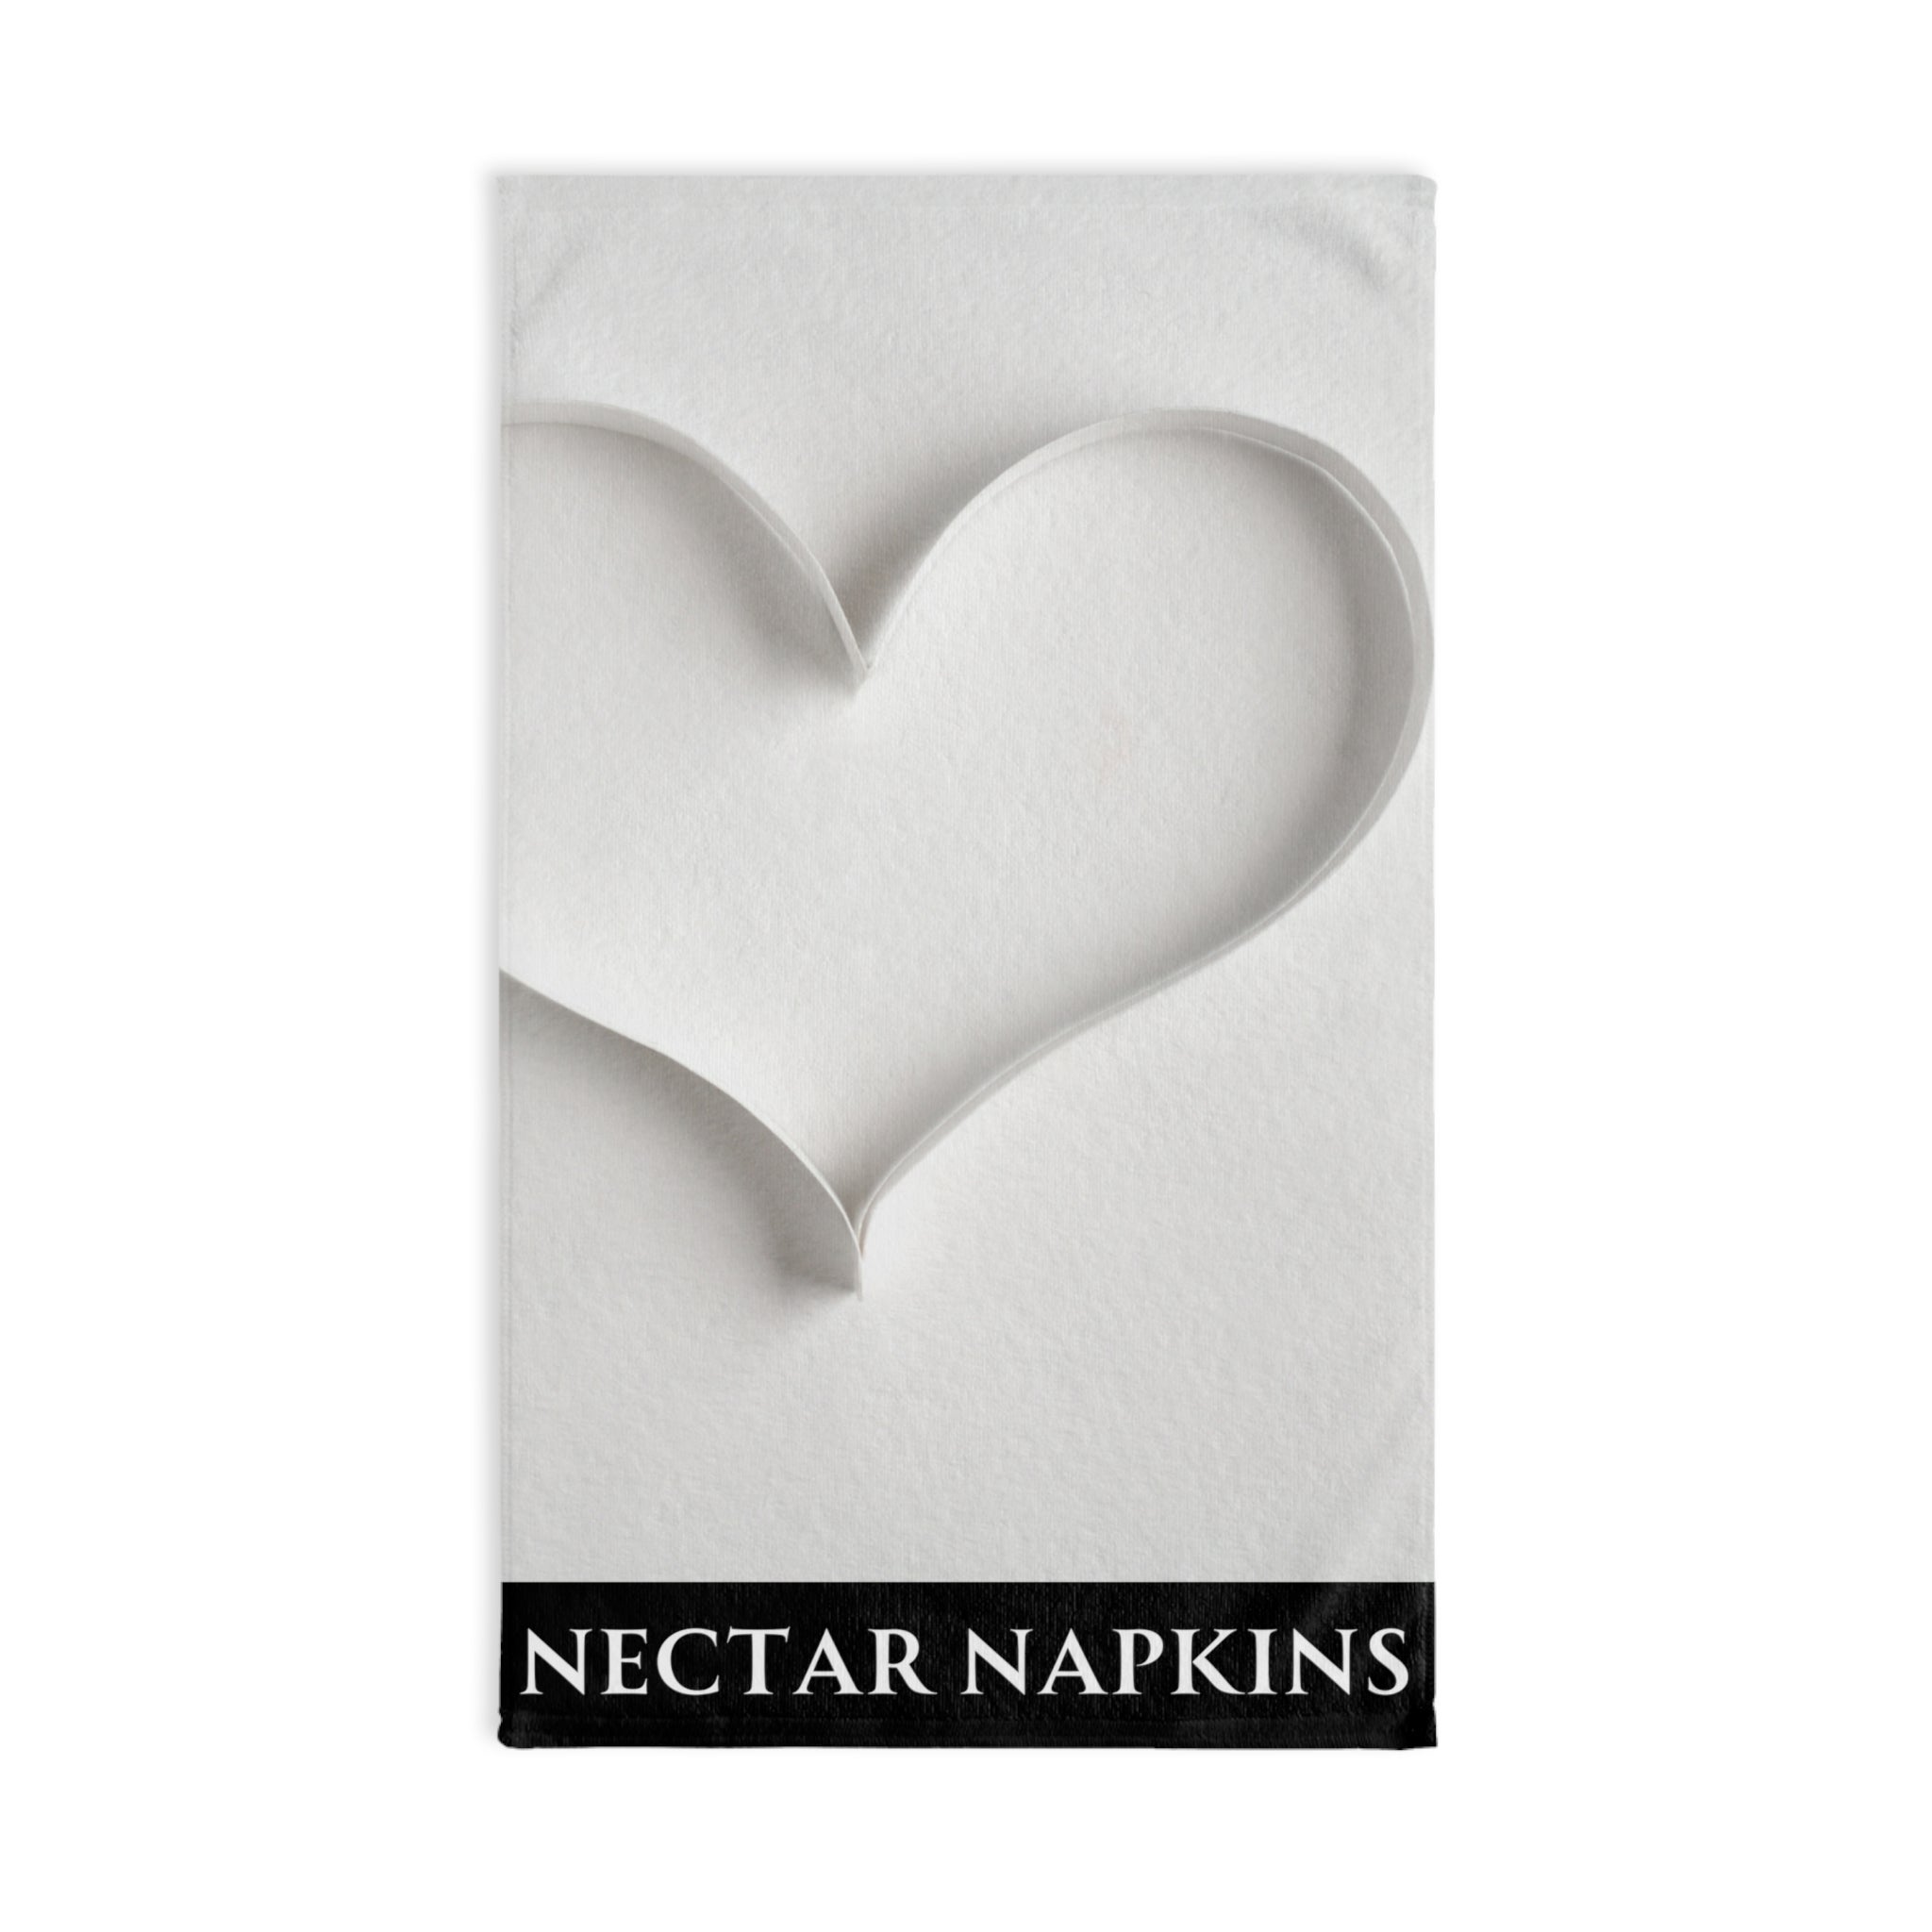 Paper Heart 3D Black | Sexy Gifts for Boyfriend, Funny Towel Romantic Gift for Wedding Couple Fiance First Year 2nd Anniversary Valentines, Party Gag Gifts, Joke Humor Cloth for Husband Men BF NECTAR NAPKINS